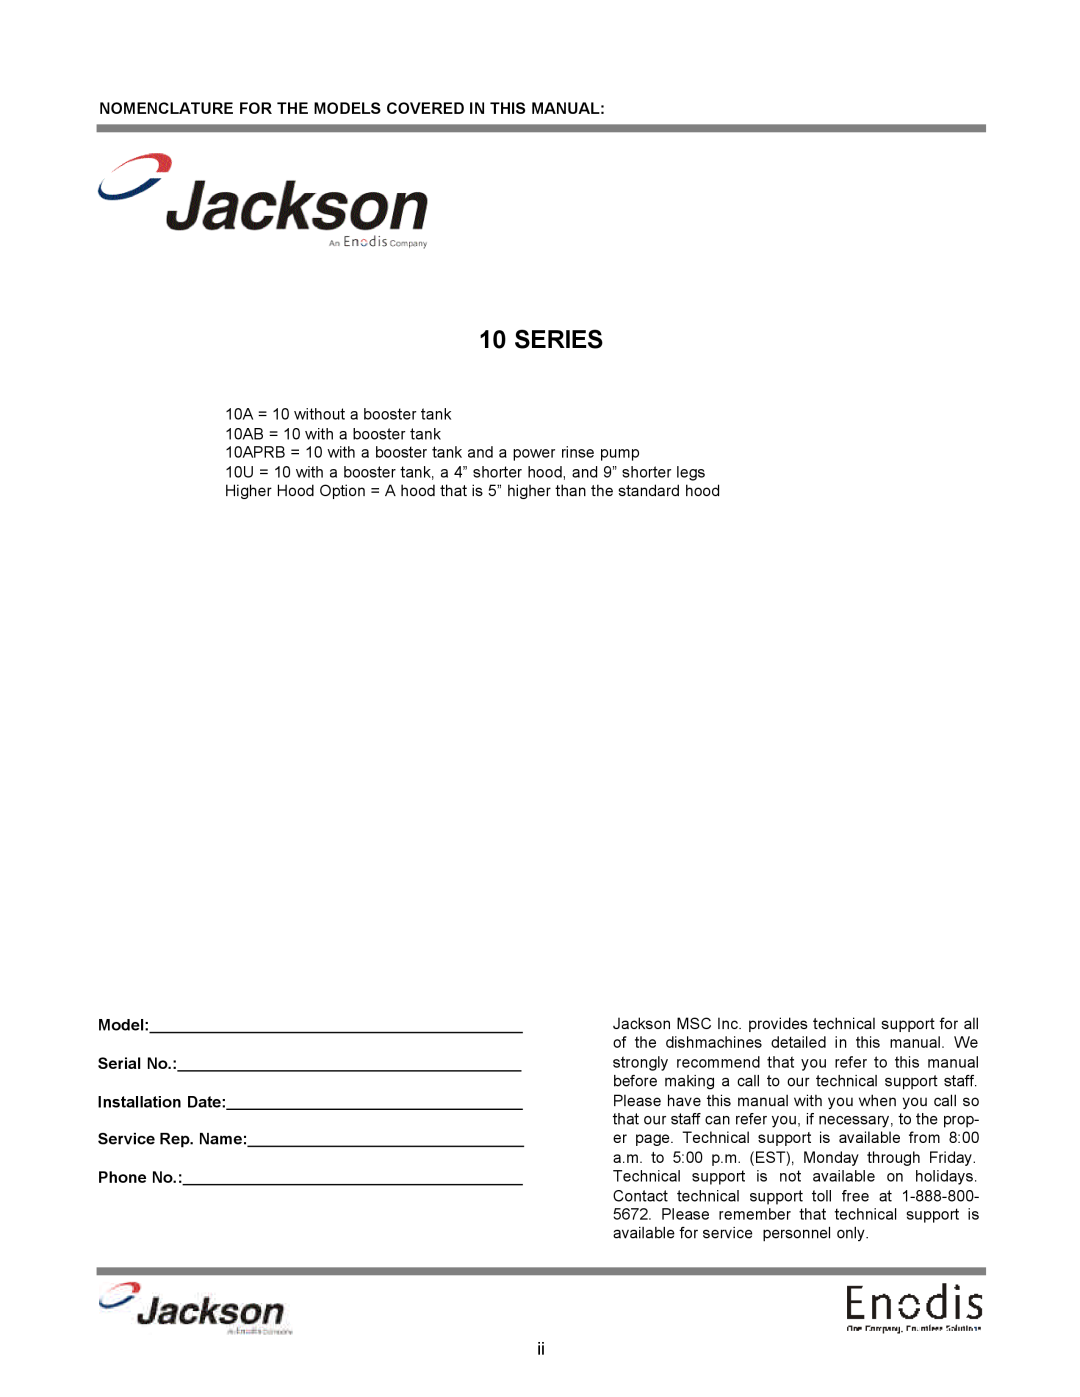 Jackson 10APRB, 10AB, 10U operation manual Series, Nomenclature For The Models Covered In This Manual 